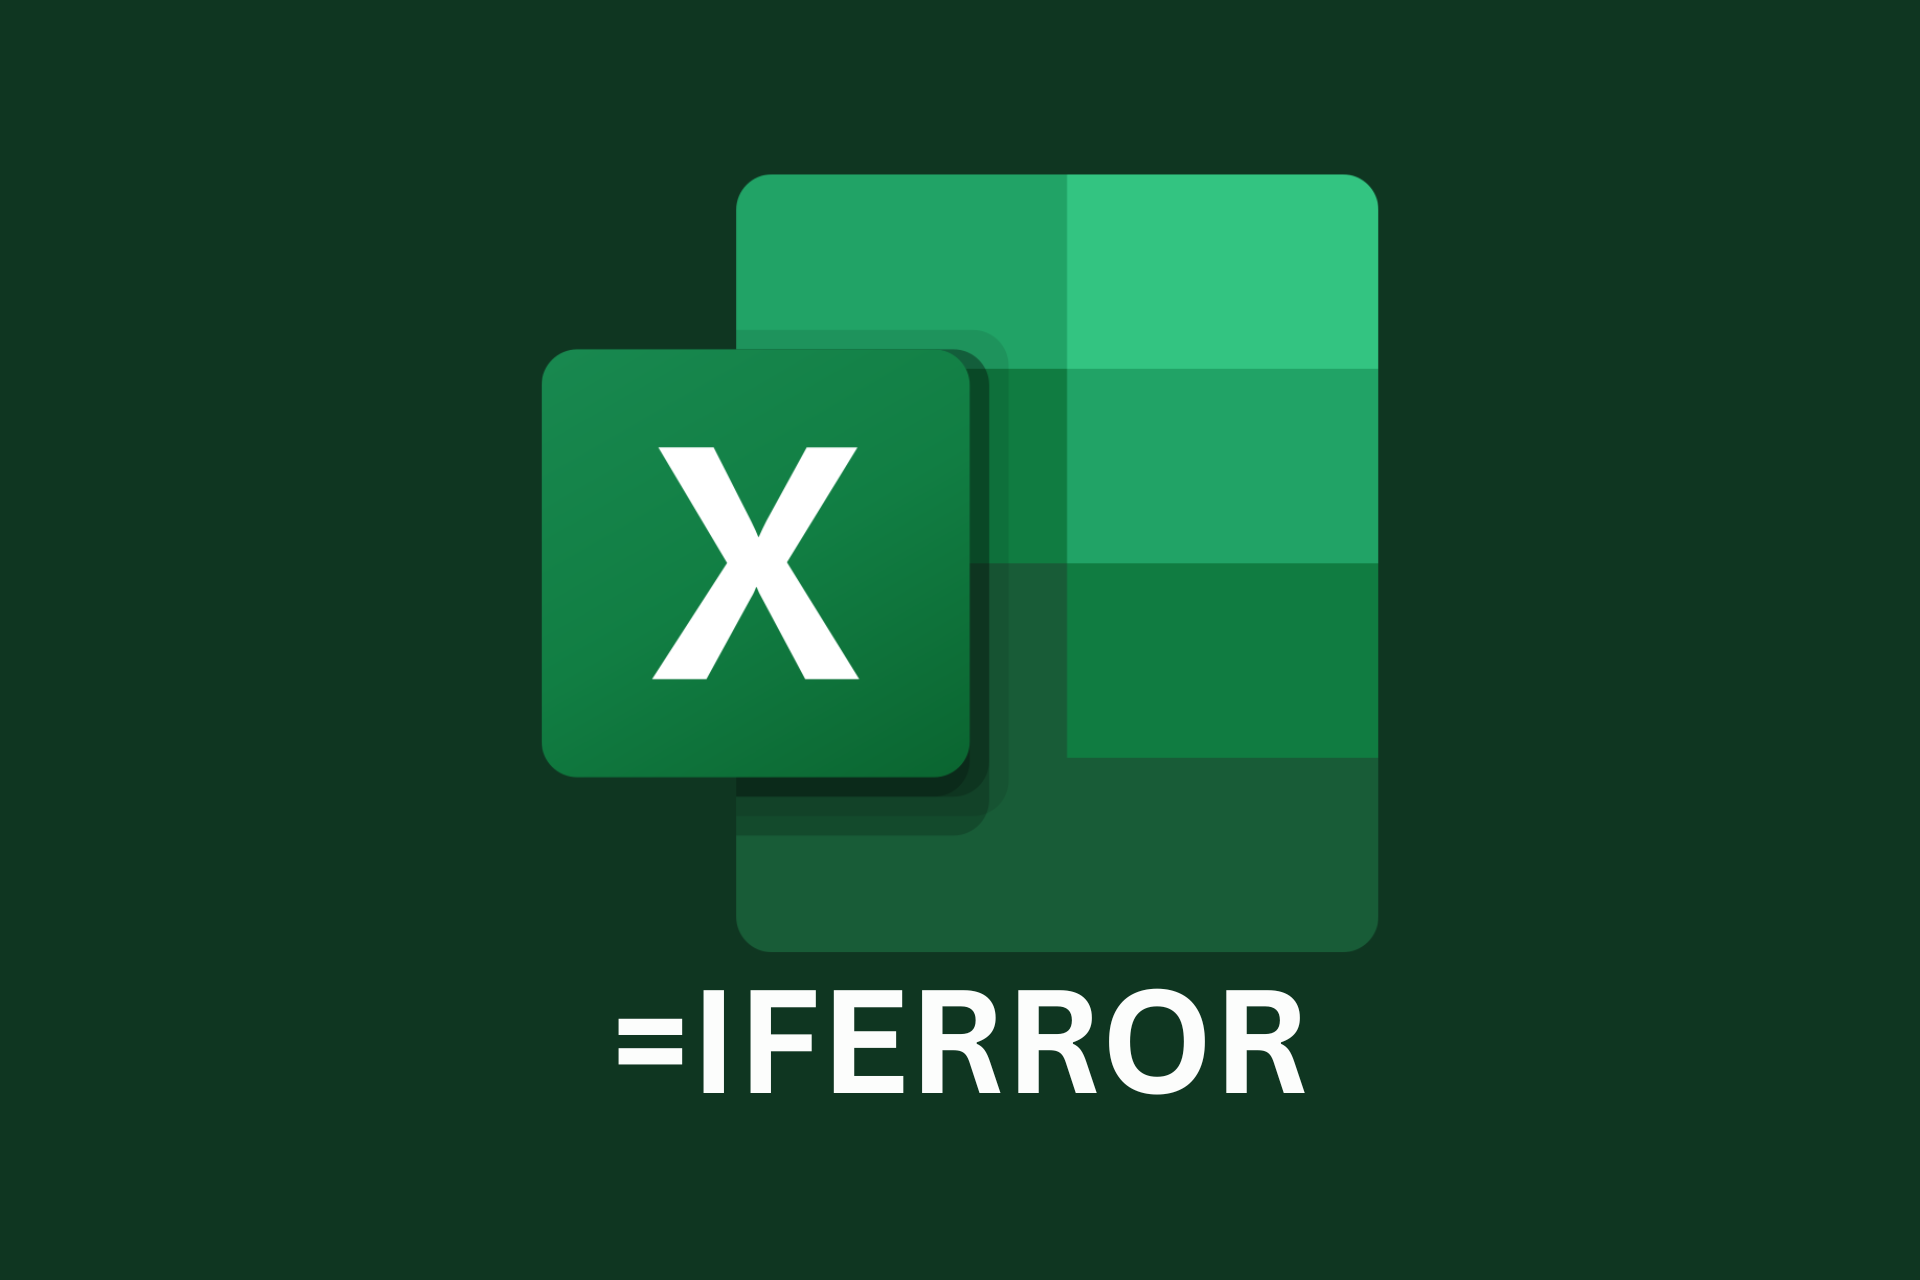 8 Examples of using the Excel IFERROR function properly